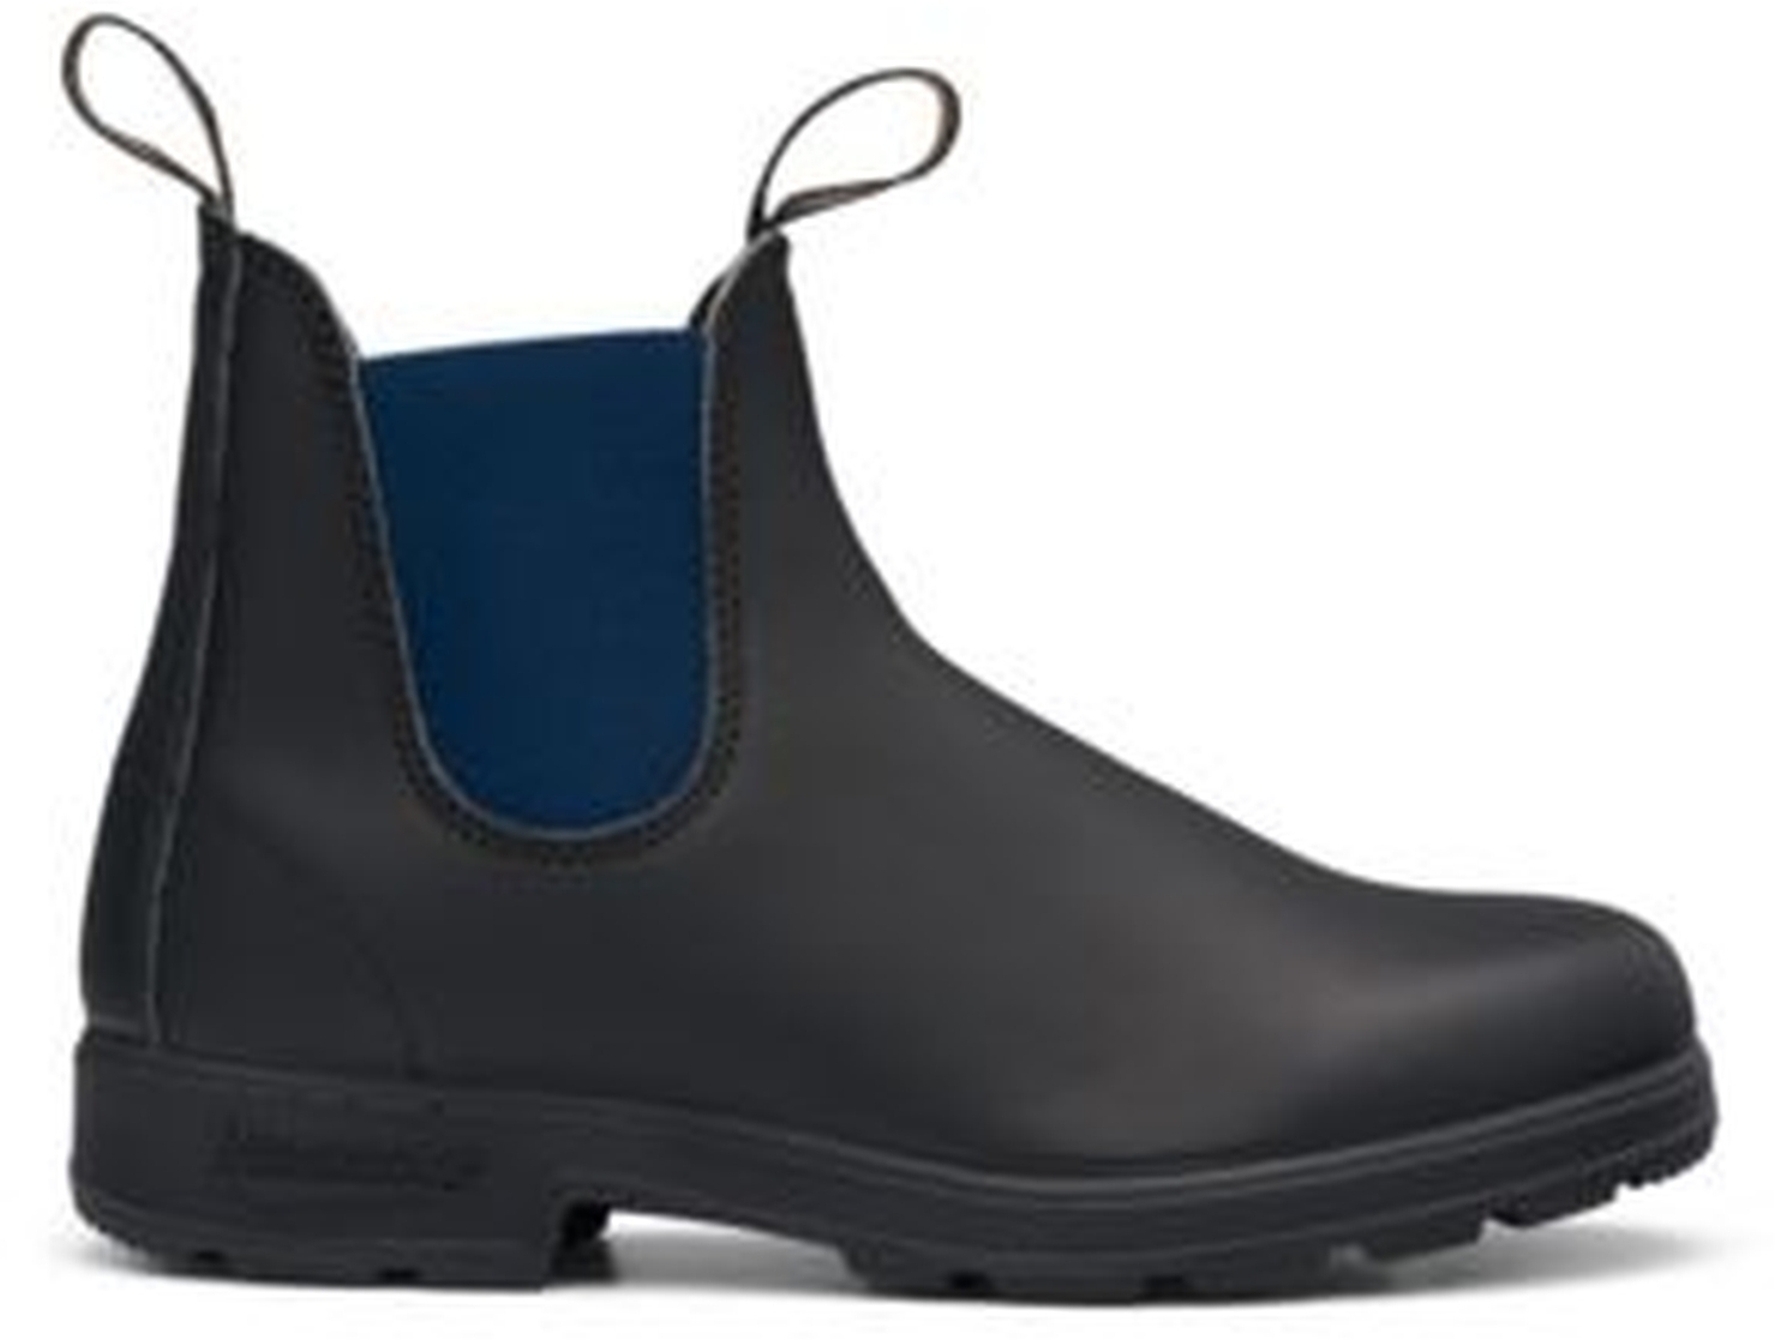 Blundstone Blundstone 1917 Voltan Black Leather with Blue Elastic  (550 Series) Calf leather